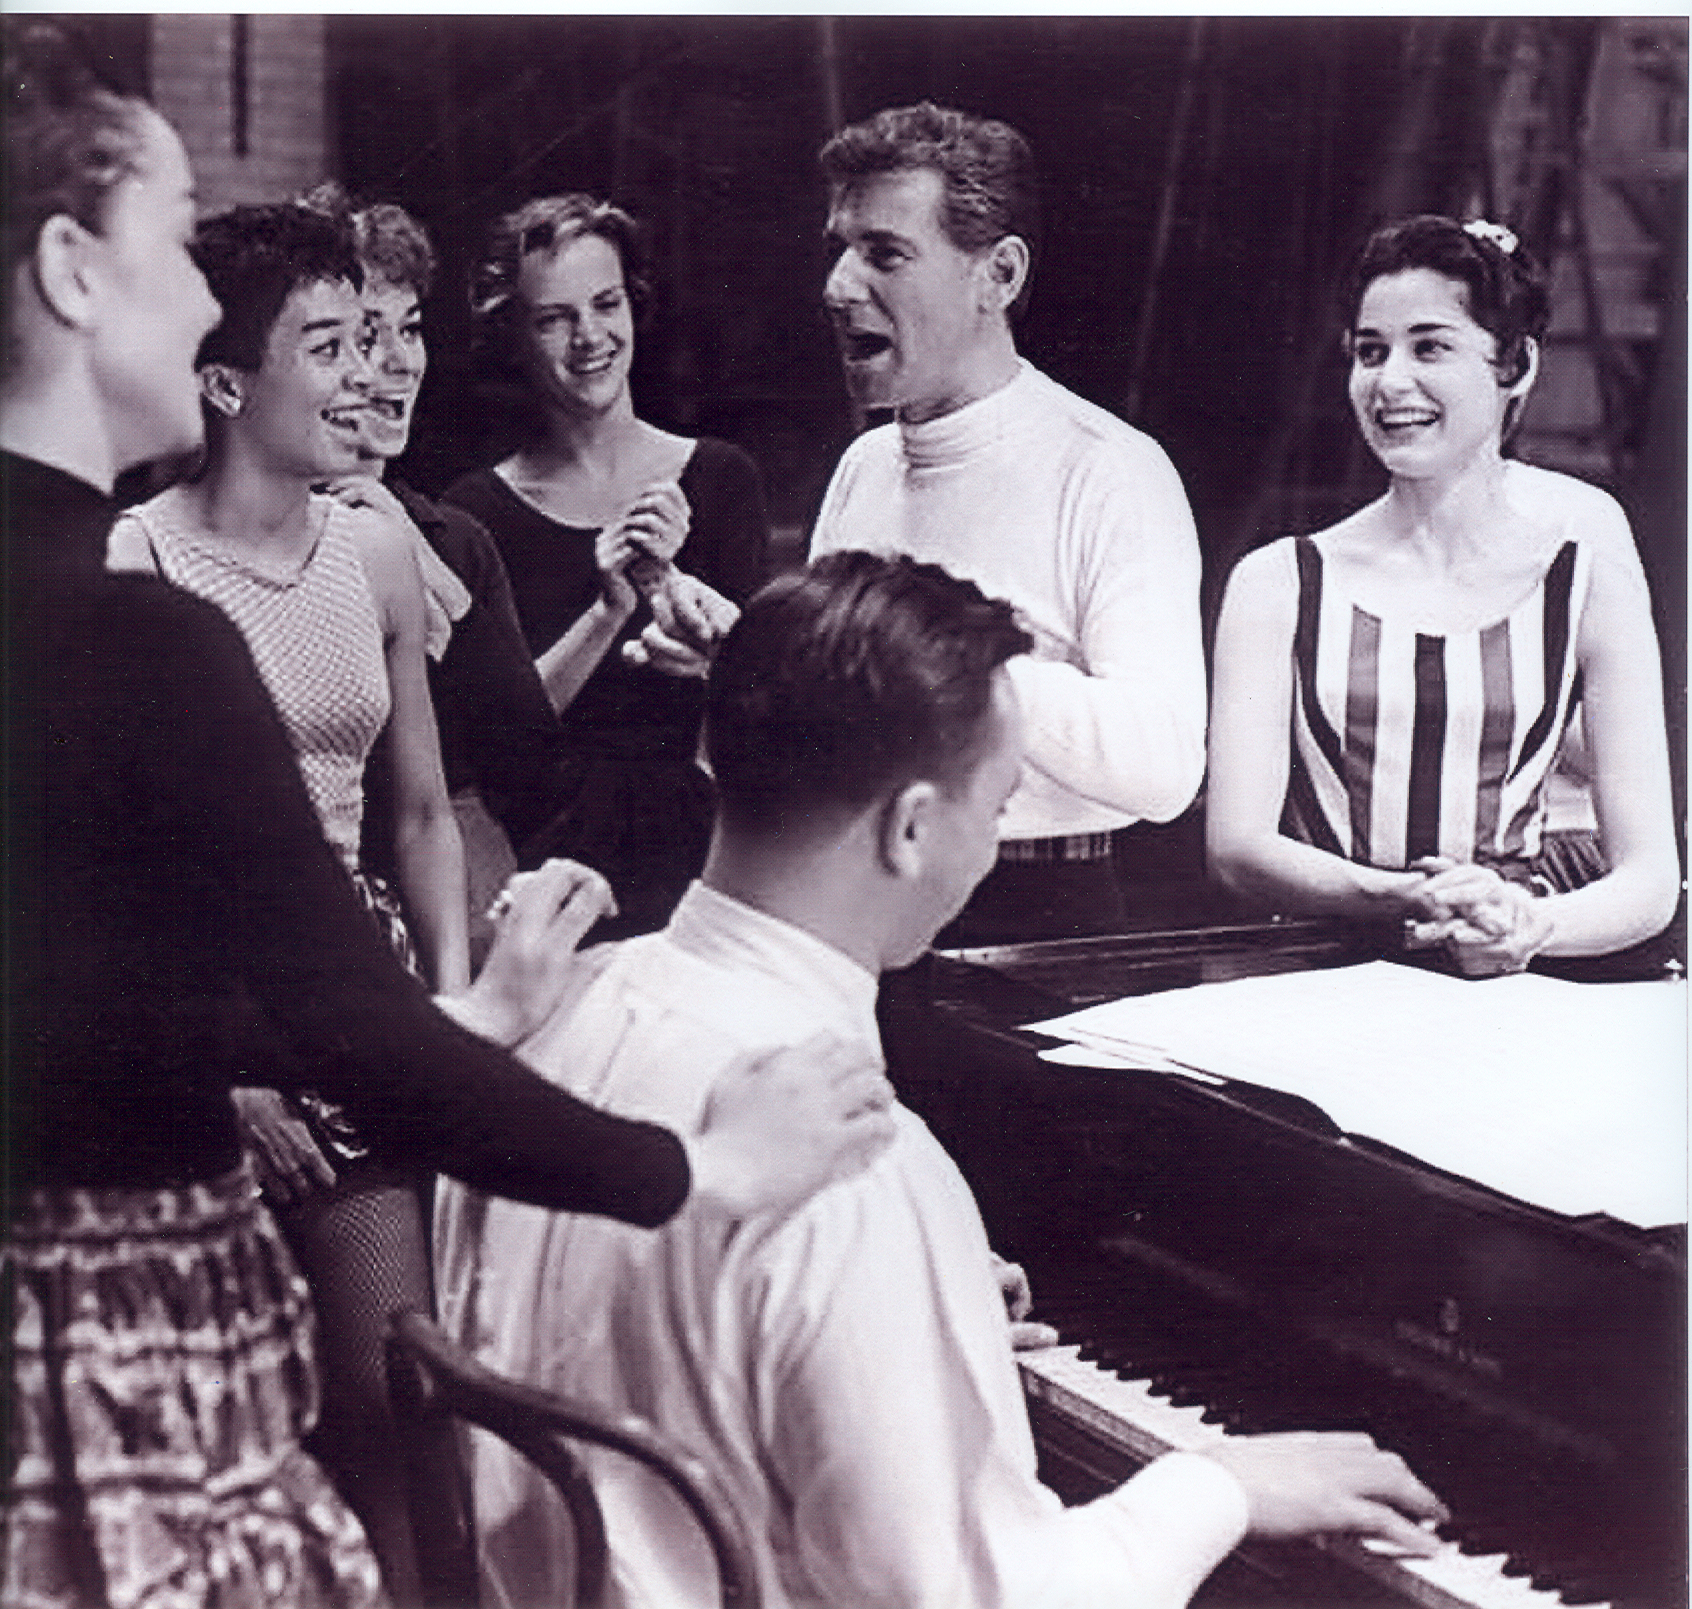 First day of rehearsal of West Side Story. To Carol's right is Leonard Bernstein. At the piano is Stephen Sondheim; Chita Rivera gives him a back rub.